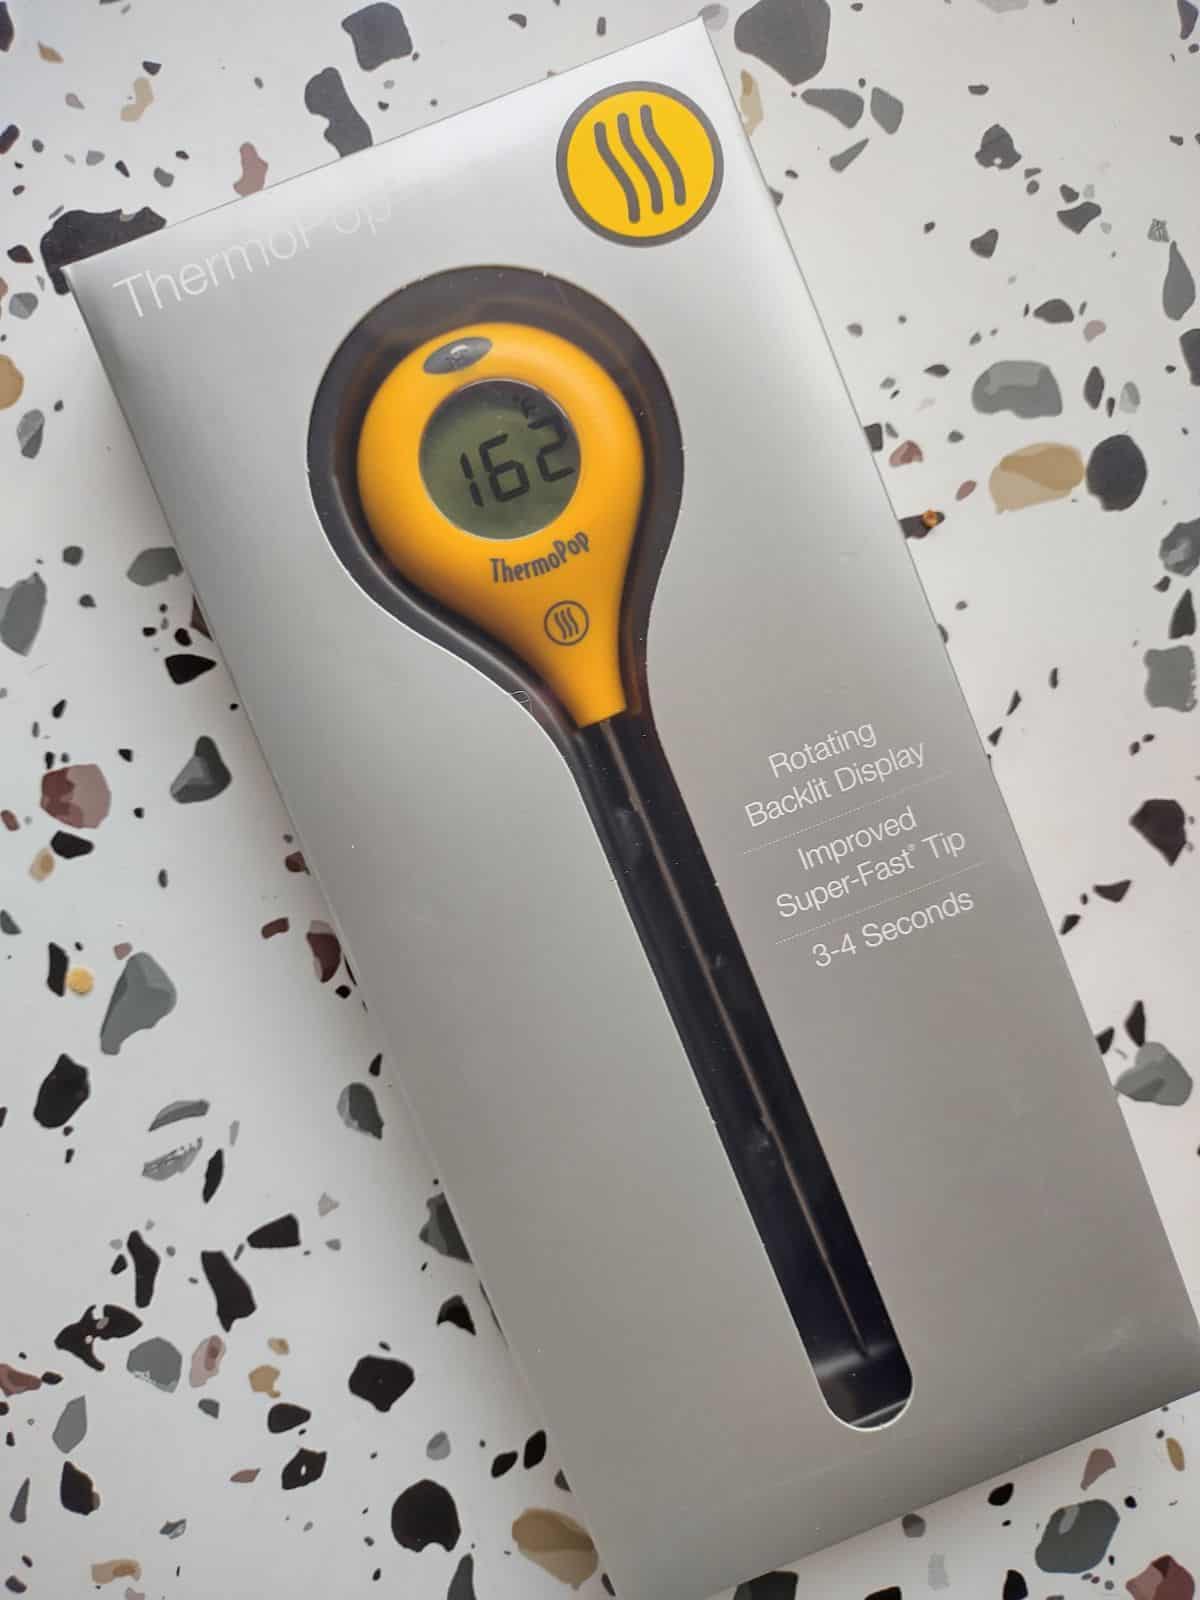 A yellow ThermoWorks ThermoPop thermometer inside a gray box.